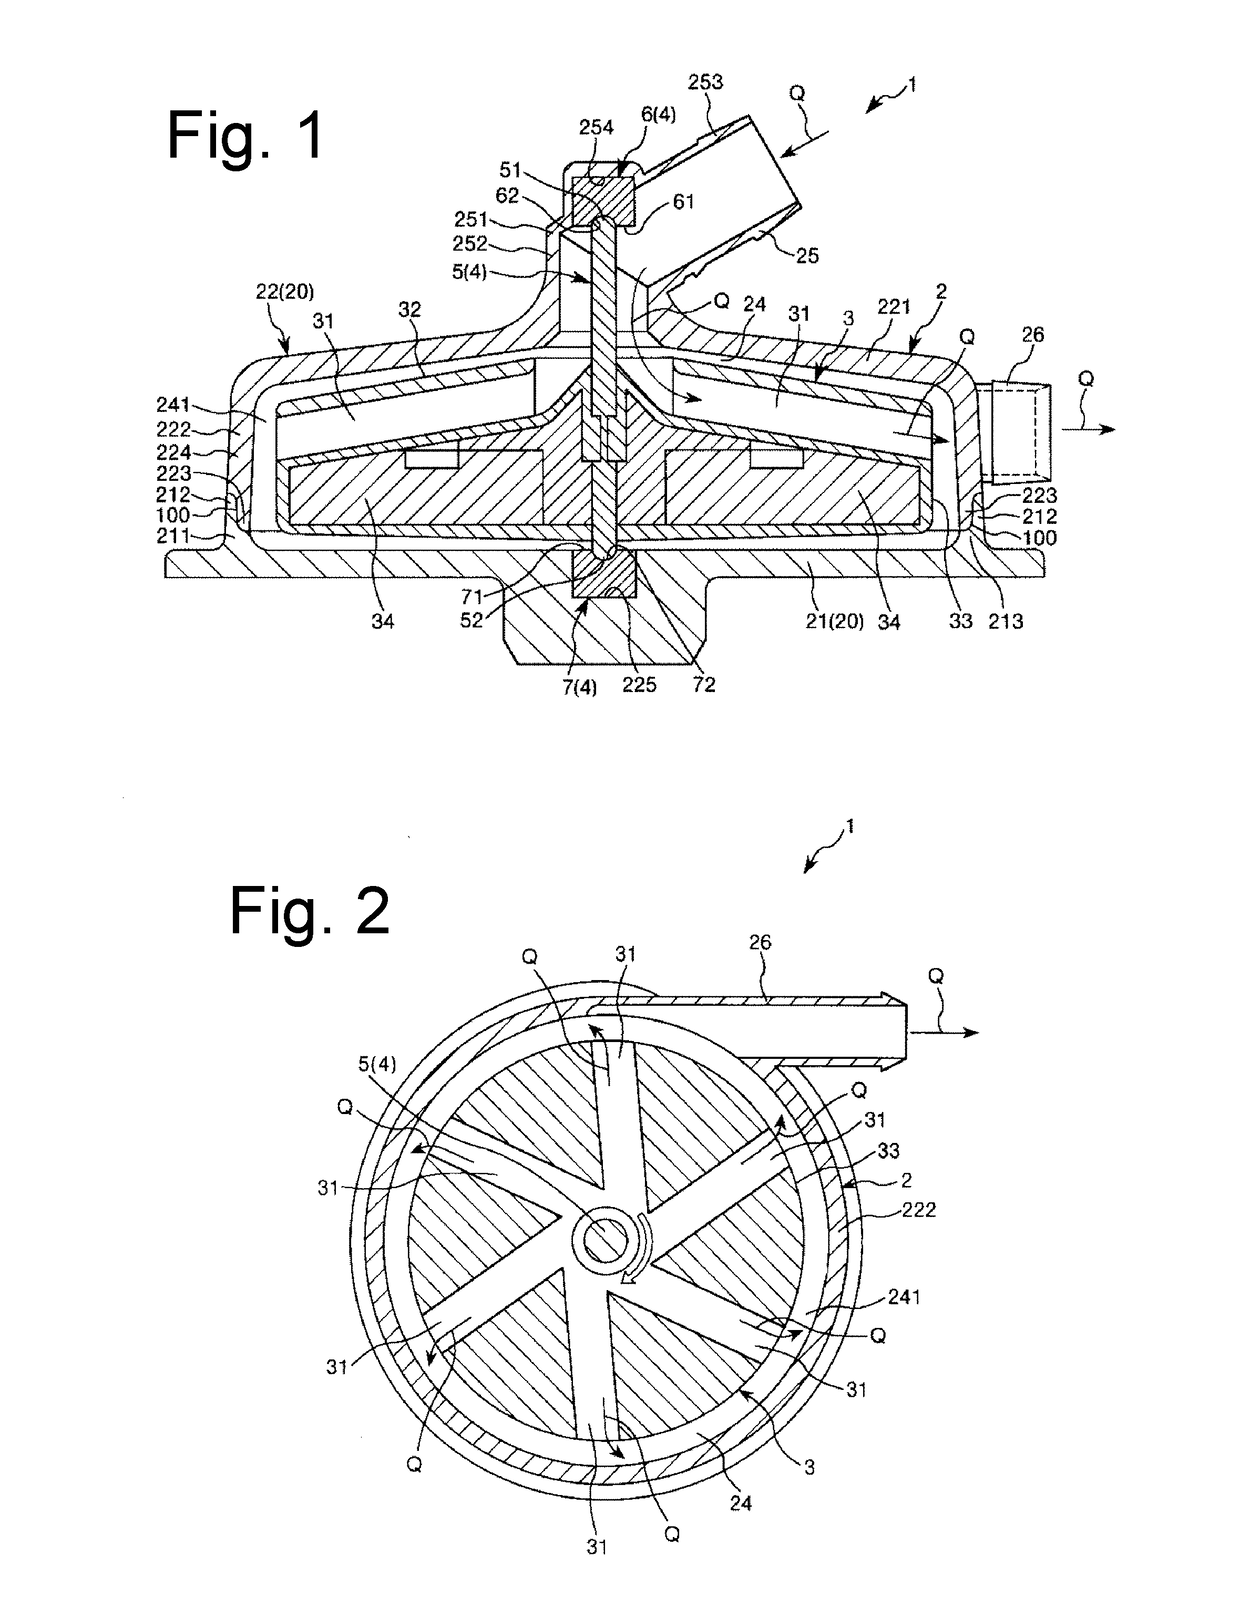 Method of manufacturing centrifugal pump